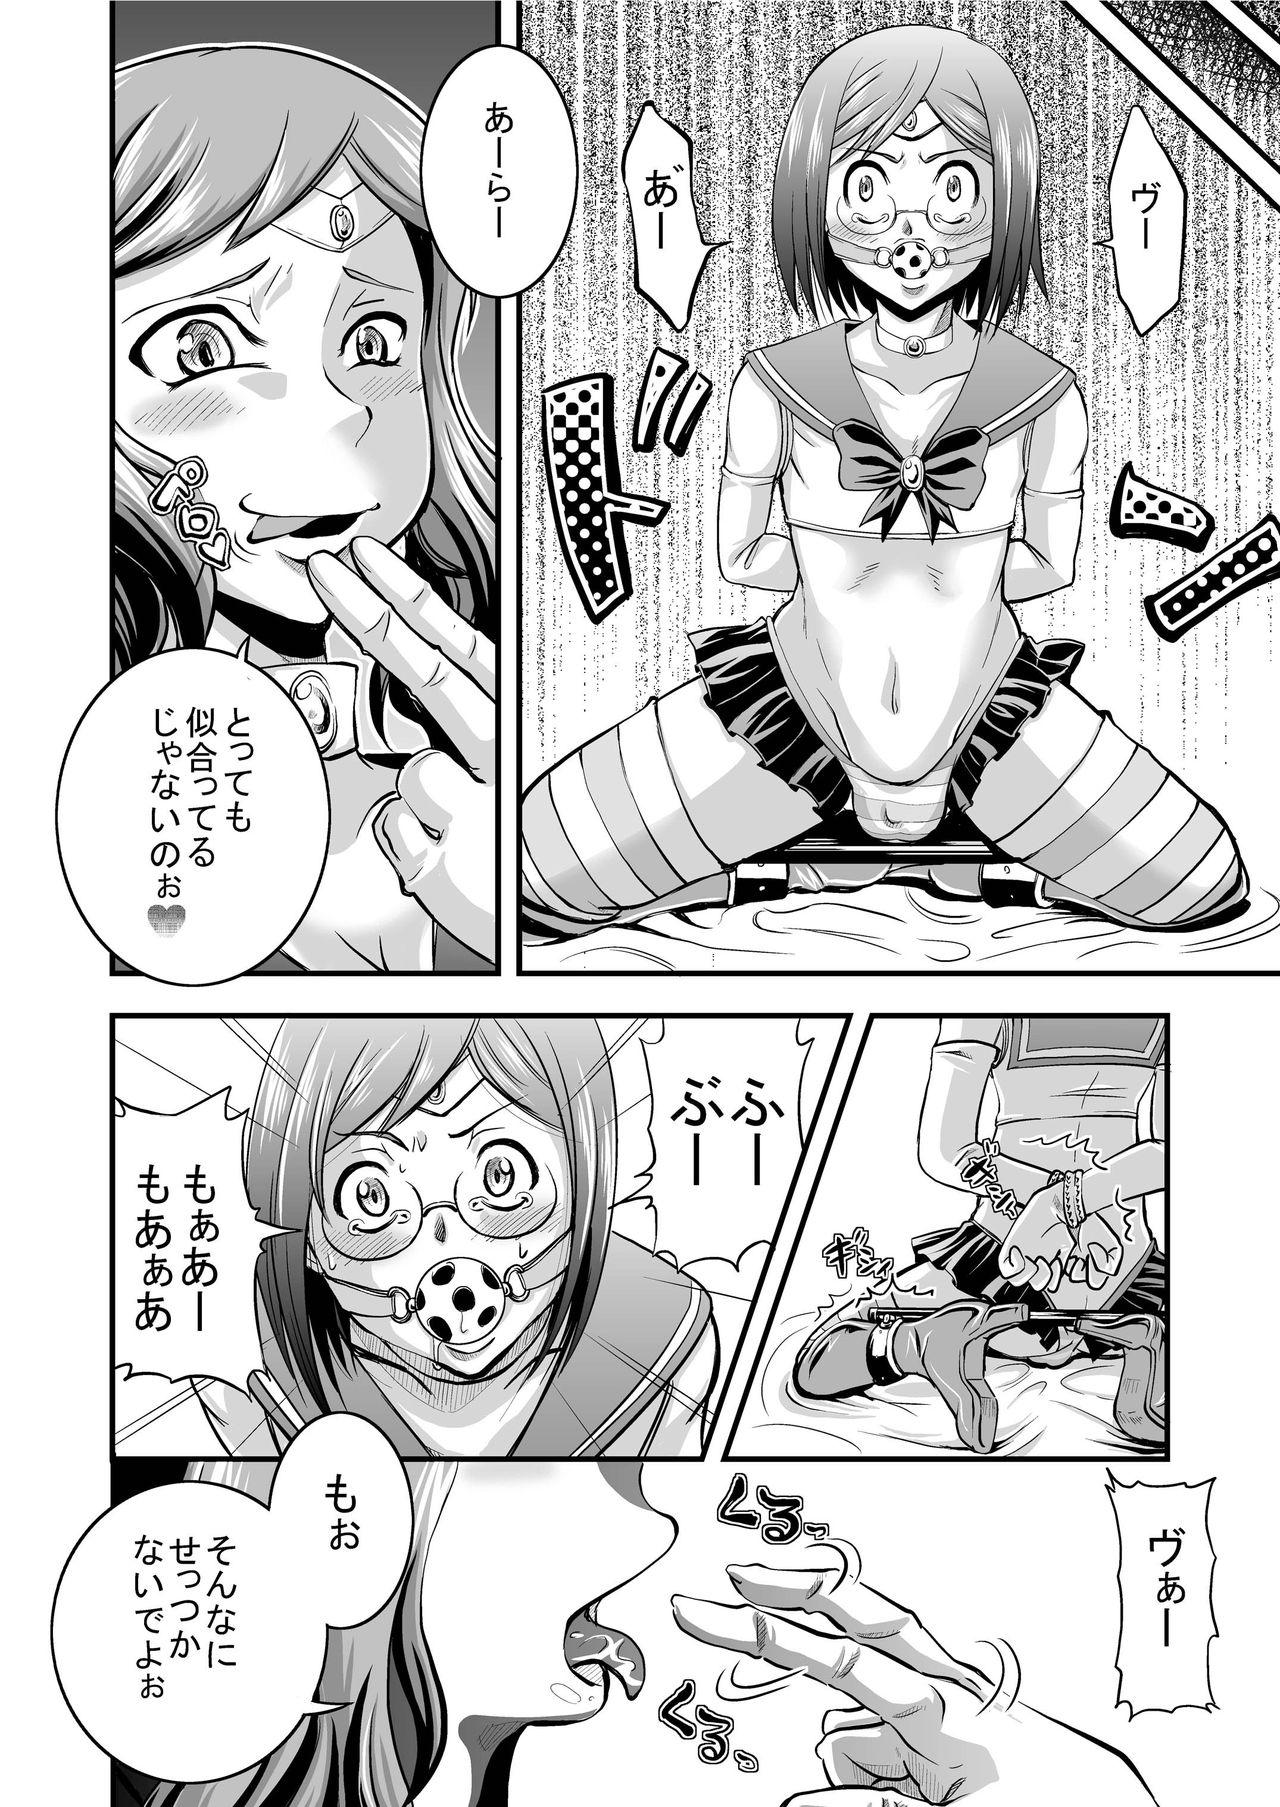 Spooning PlaMo-kyou Chijo - Gundam build fighters Lesbian Sex - Page 10